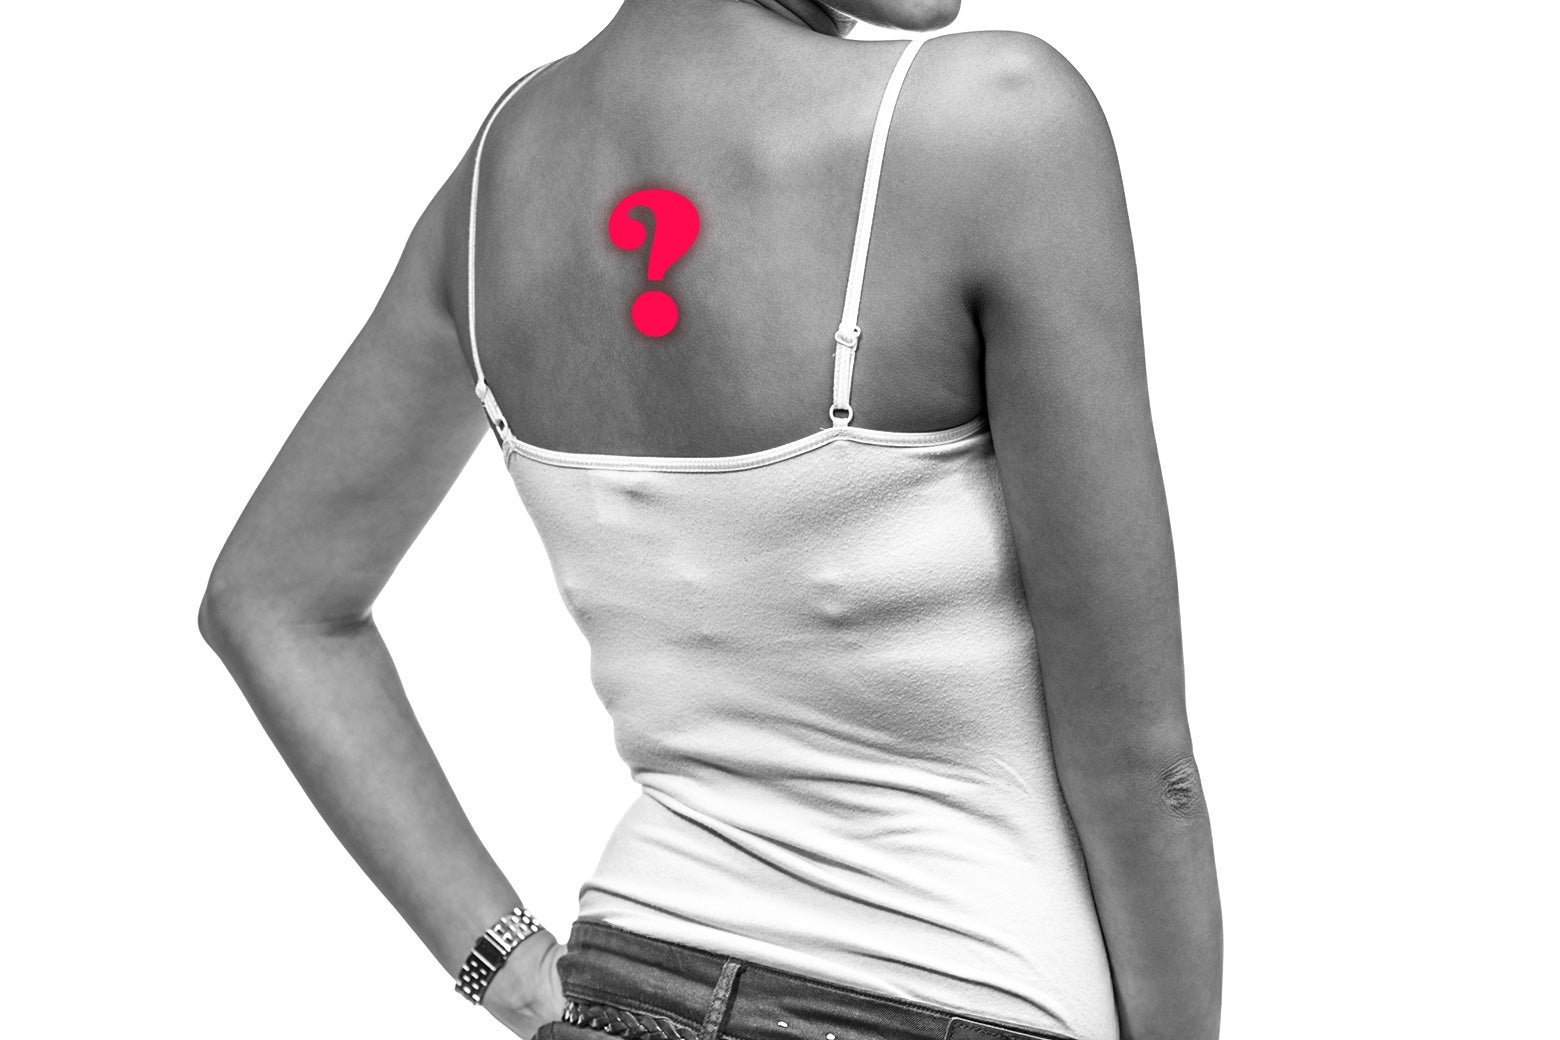 A woman with a graphic of a question mark on her back.